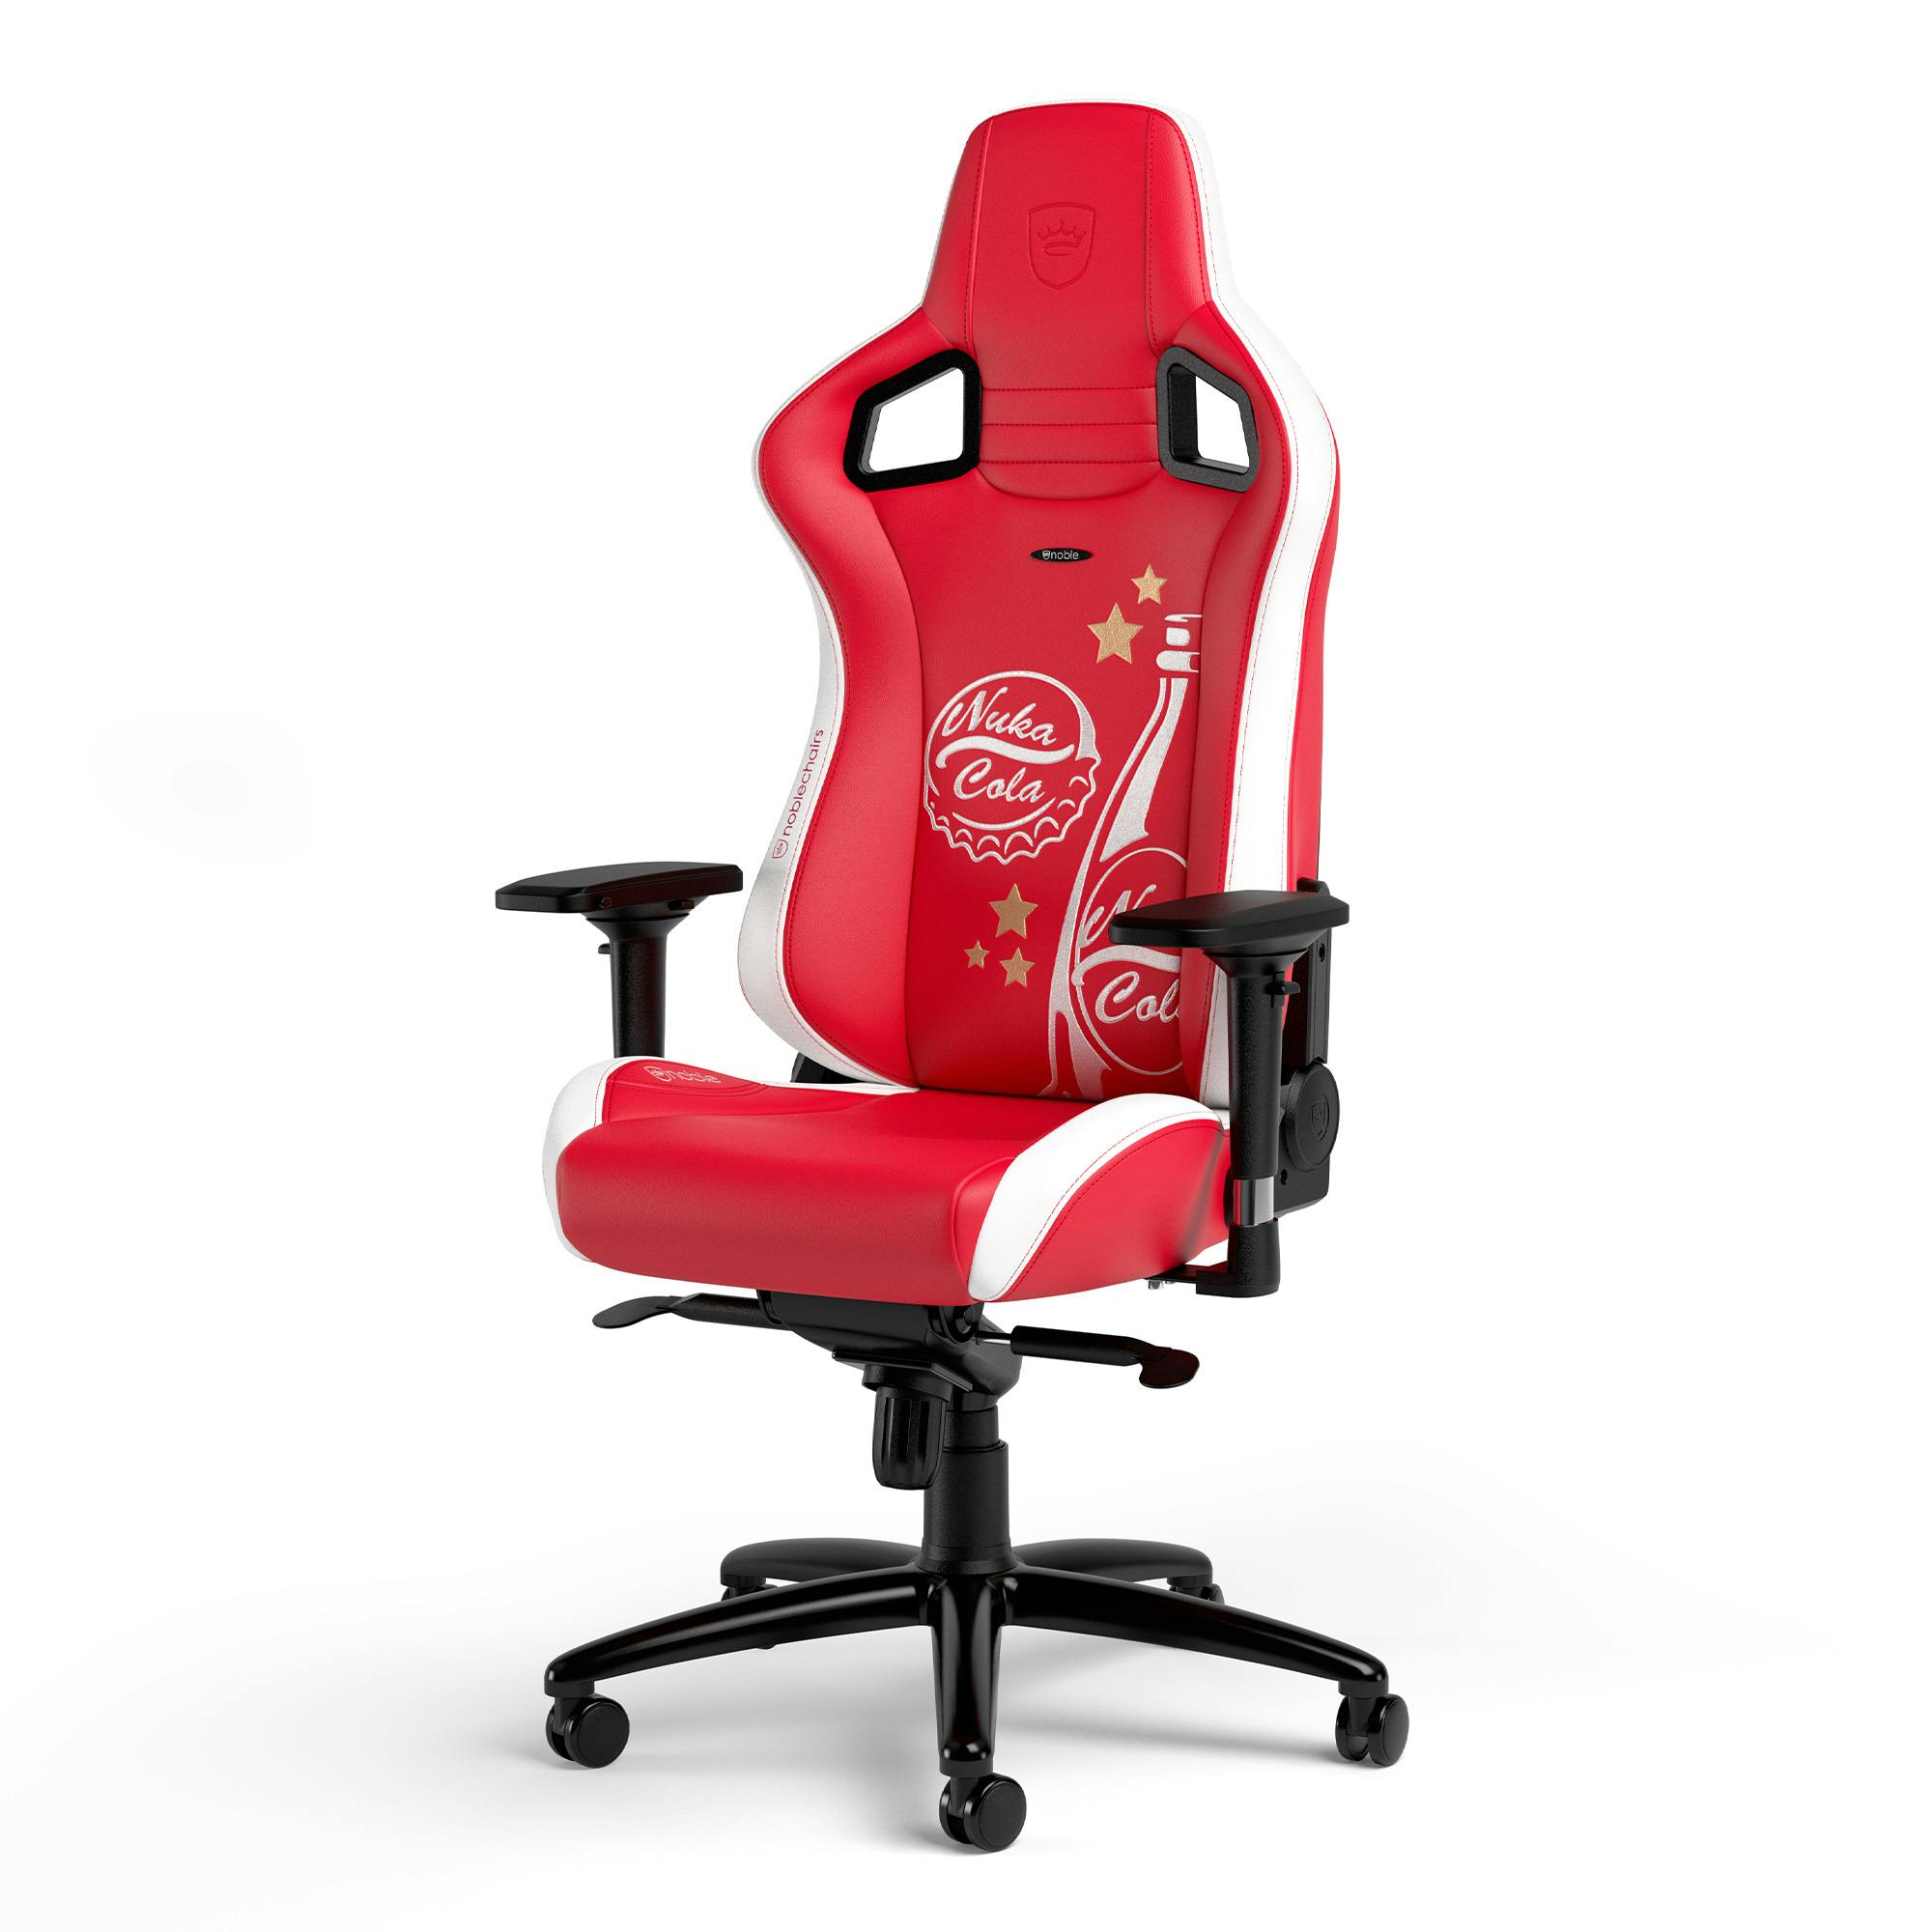 noblechairs - EPIC Fallout Nuka-Cola Edition